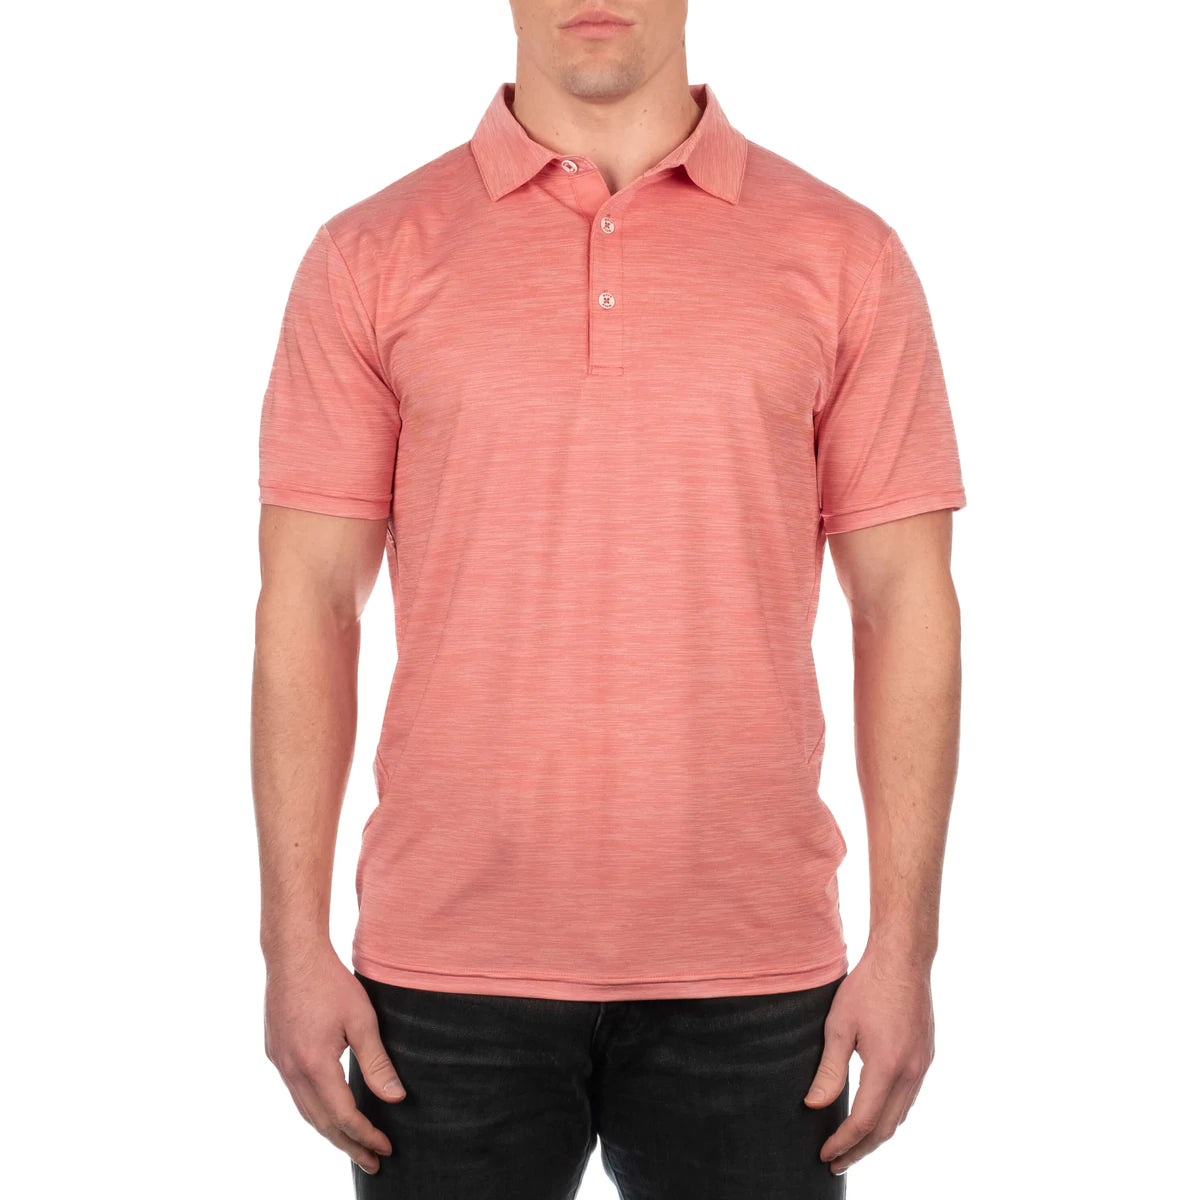 PERFORMANCE POLO - RED